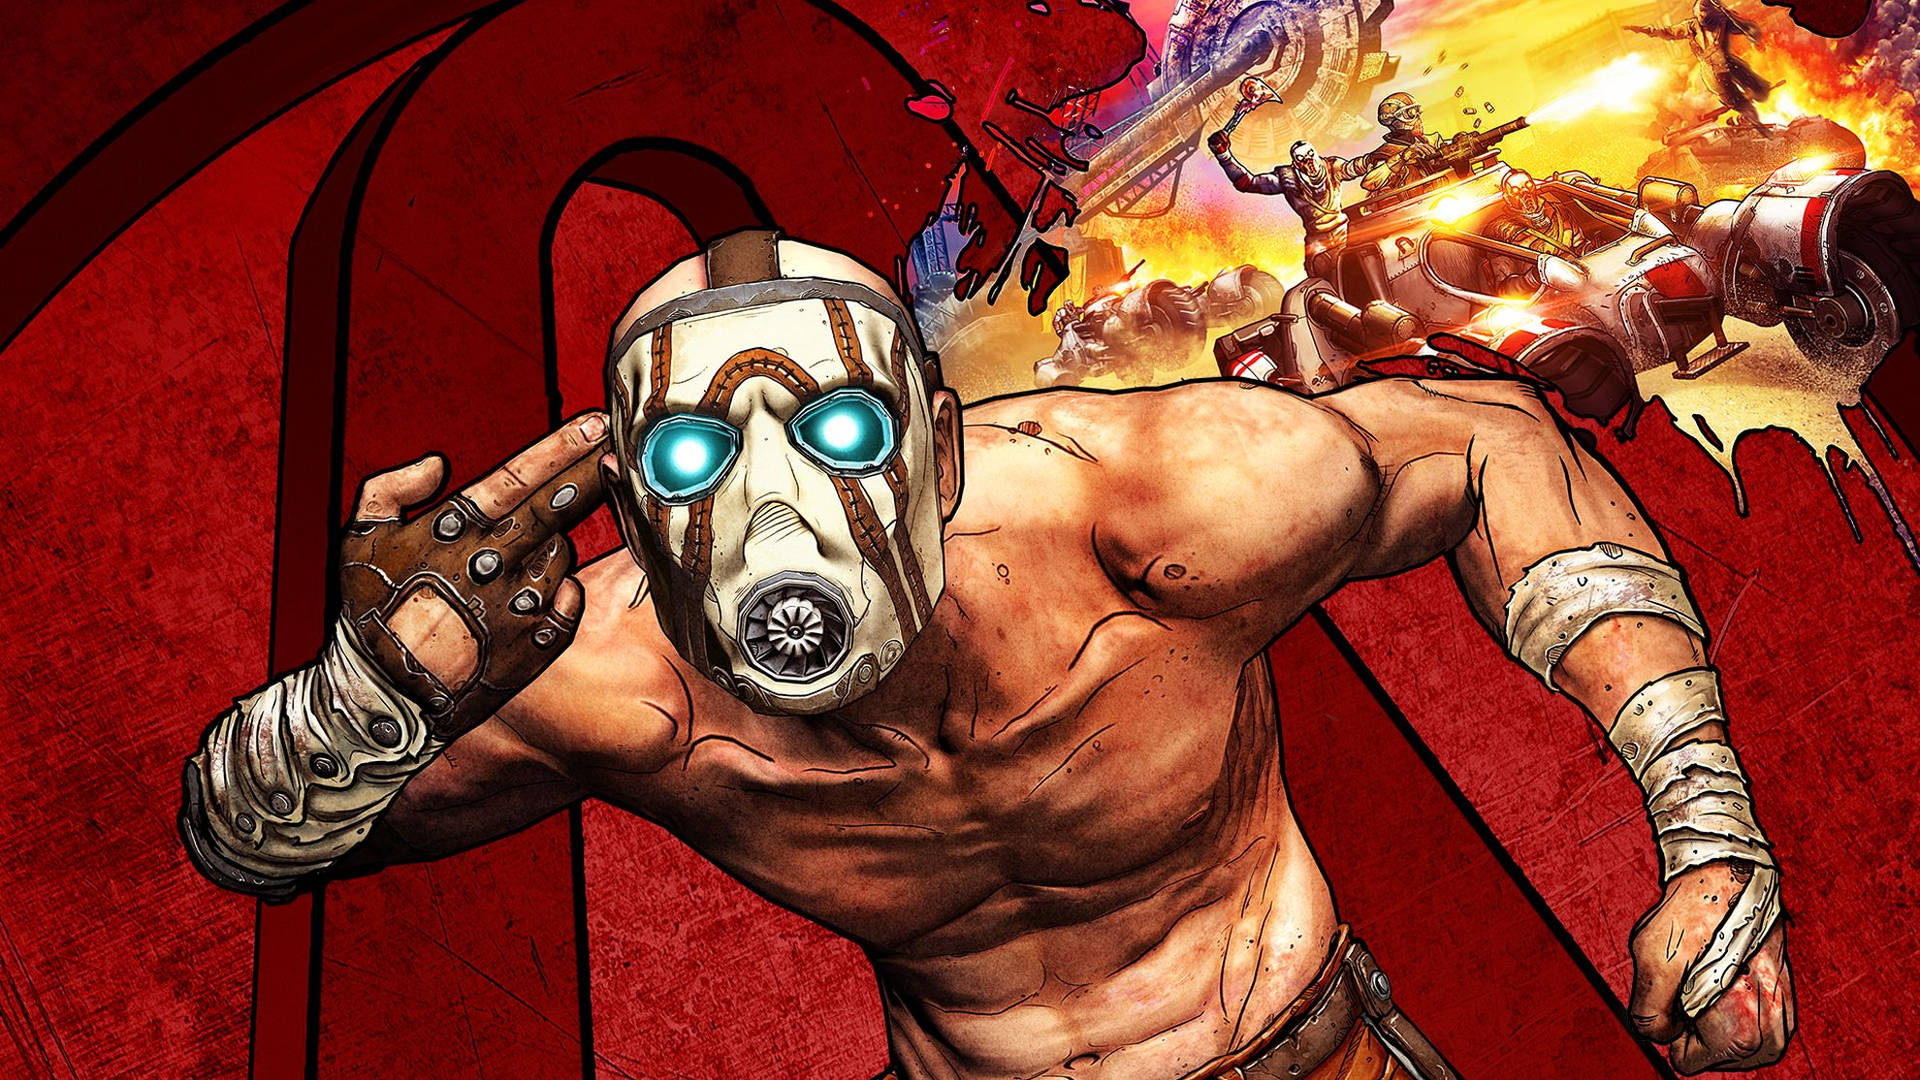 Join the chaos of Pandora with the nefarious Borderlands Psycho Wallpaper